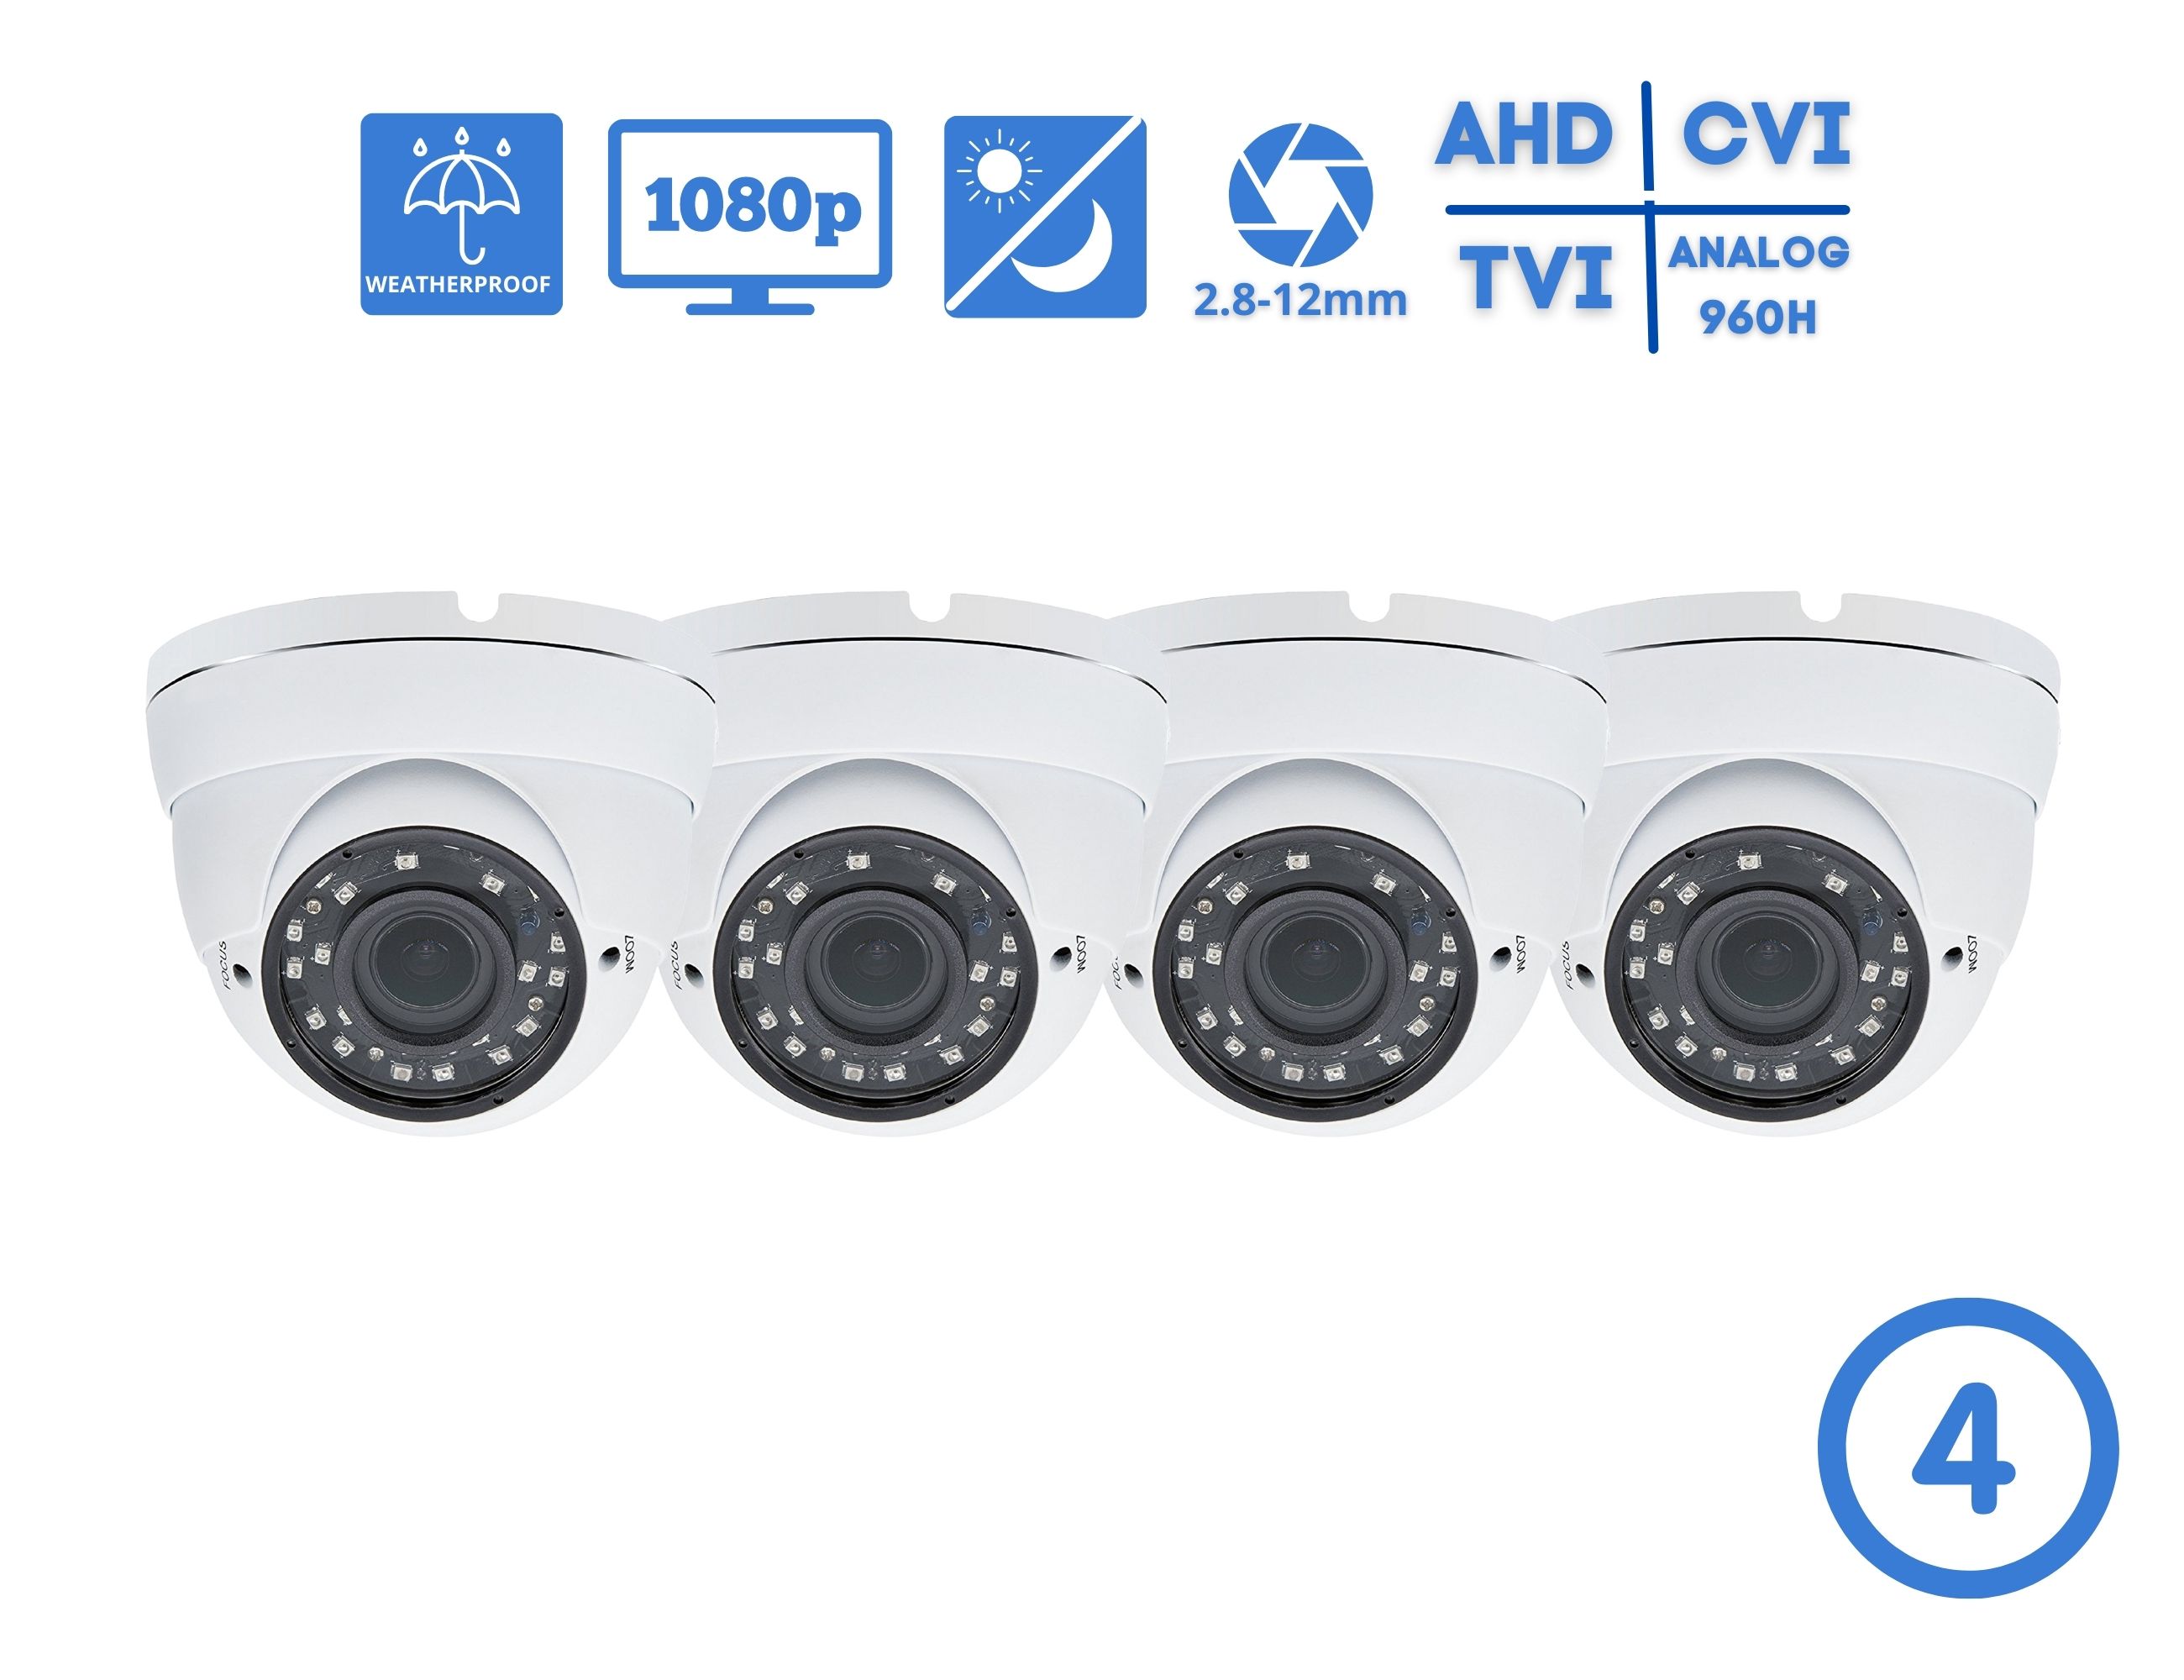 Evertech 4 Pcs HD 1080p Indoor Outdoor Day Night Vision CCTV Security Surveillance Dome Camera - image 1 of 6